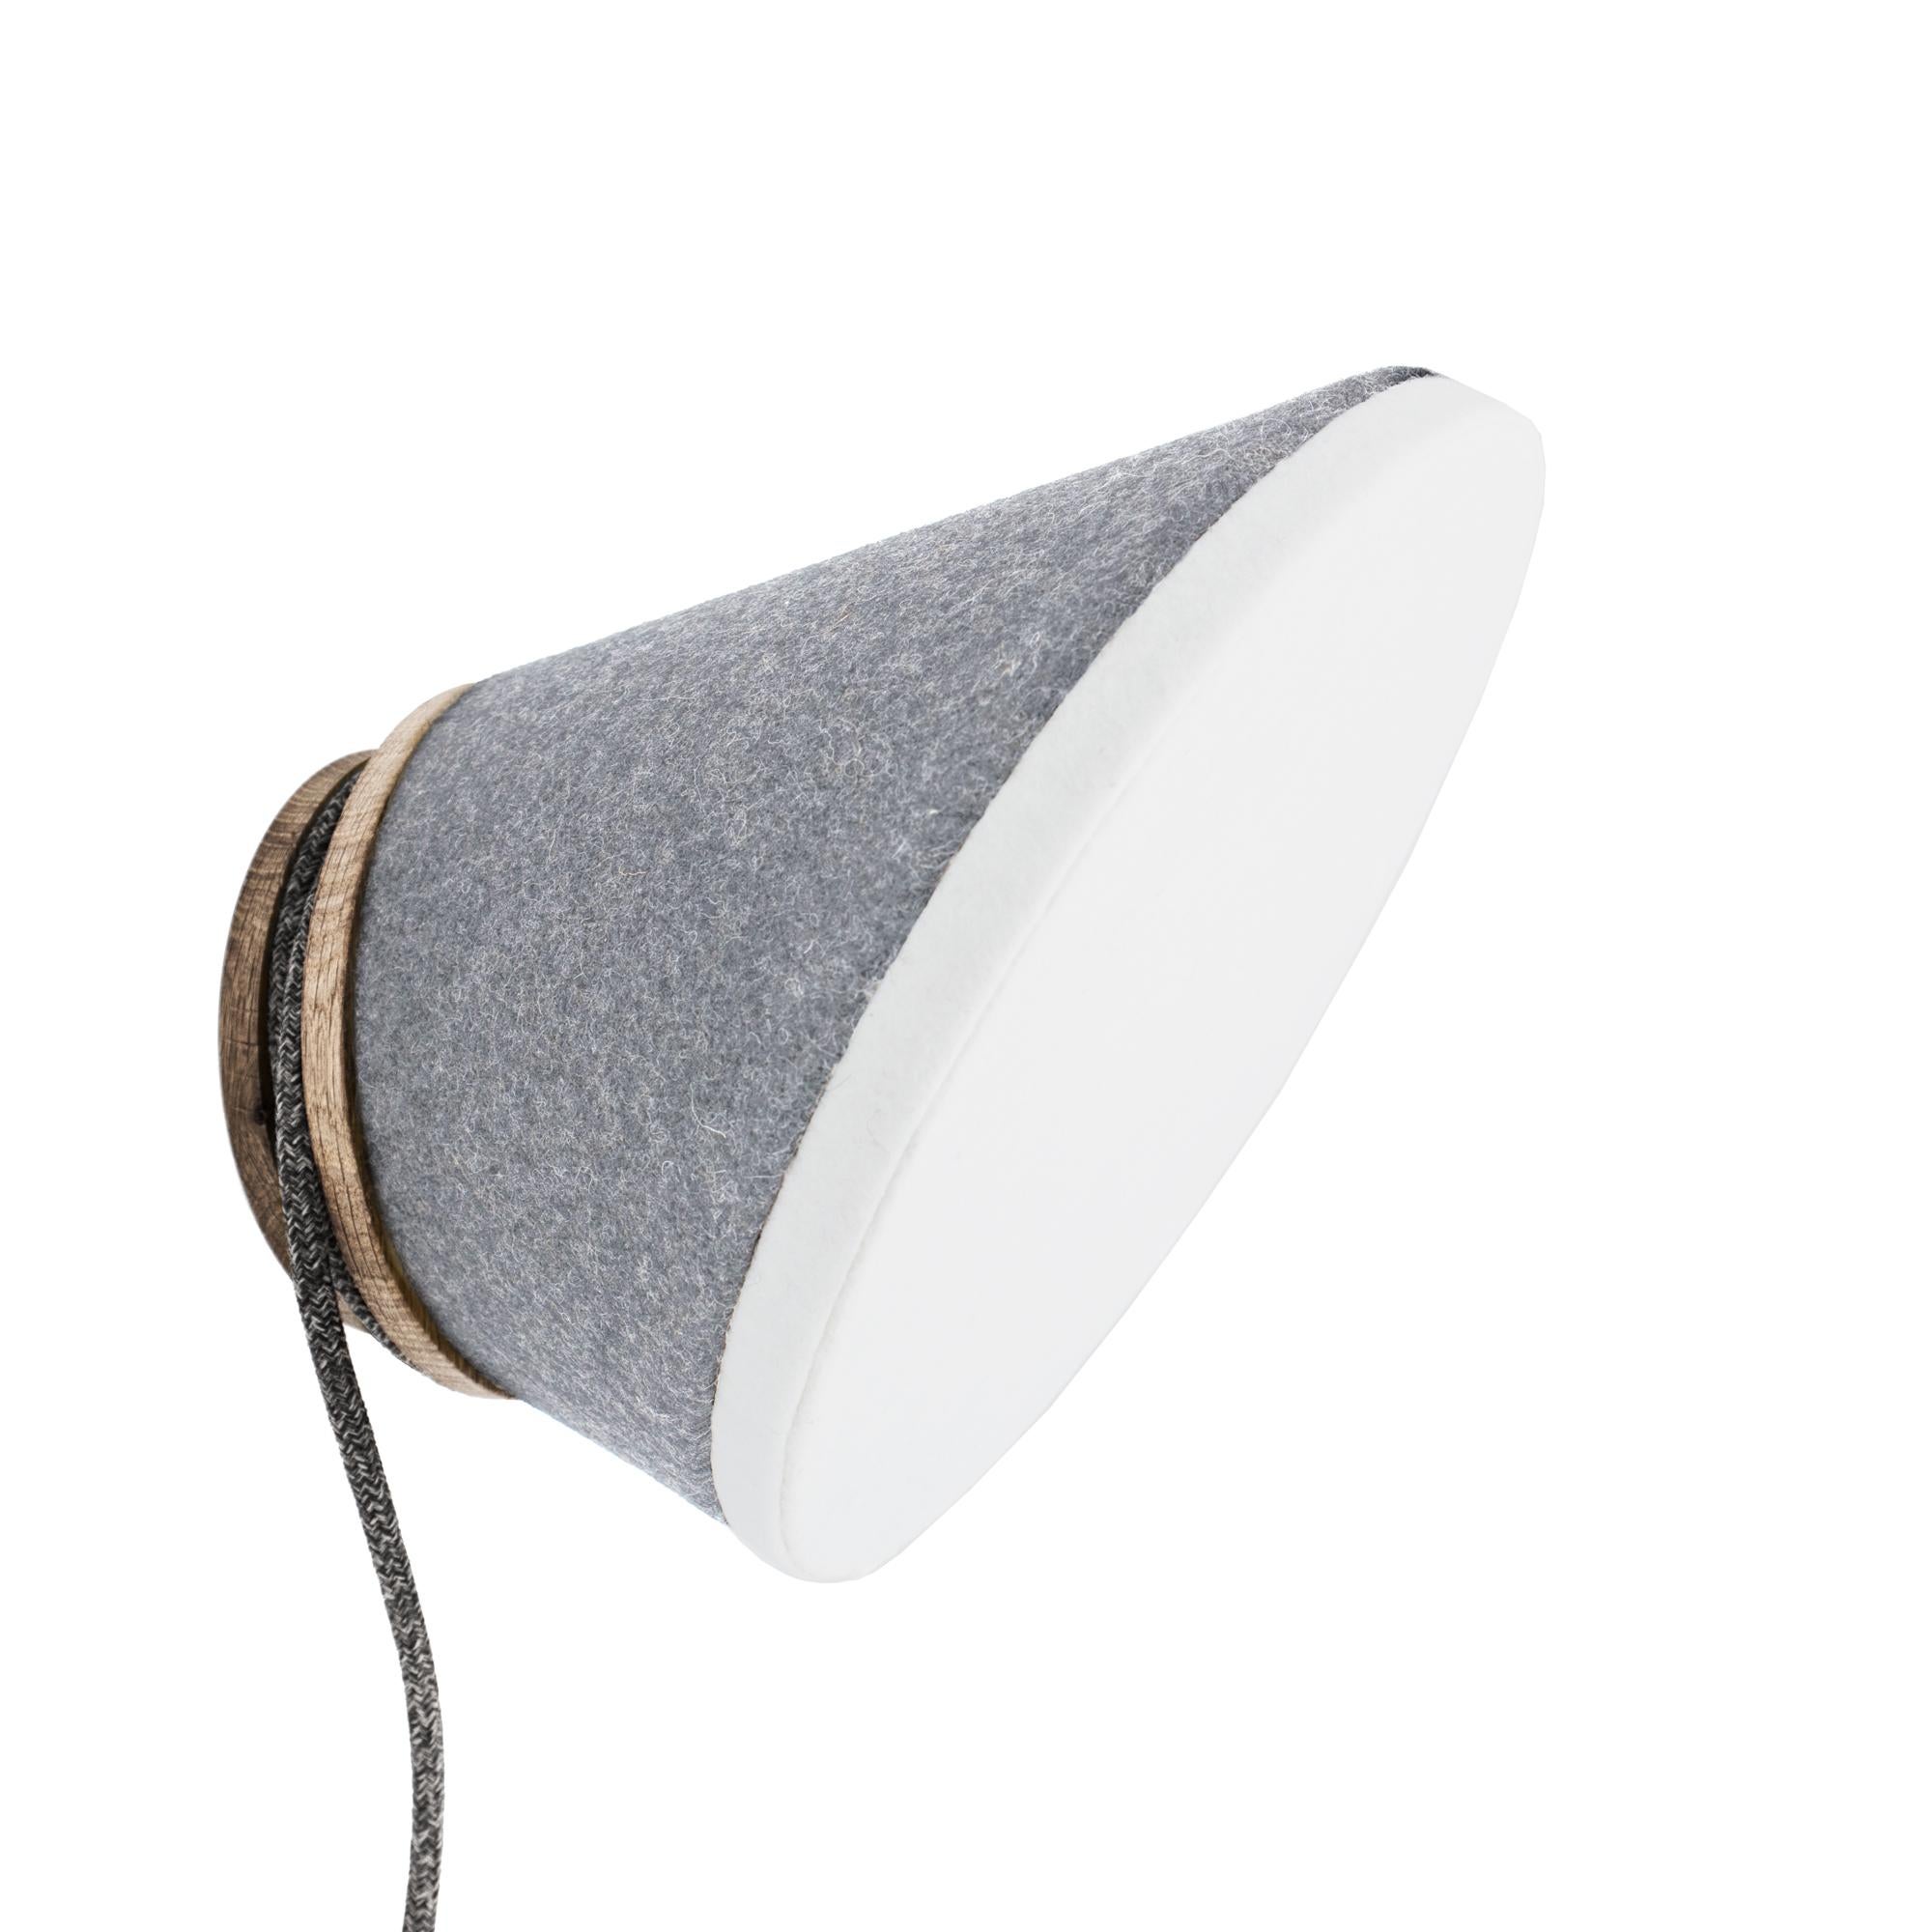 Applique 16 by KNGB
Dimensions: D 25 x H 25 cm
Material: Oak, Leather, LED Lightbulb Gx53, 7W 2700K (not included)

A bit more discreet, the wall lamp brings decoration and clarity to corners, corridors or bedspreads. Easy to install, 360°